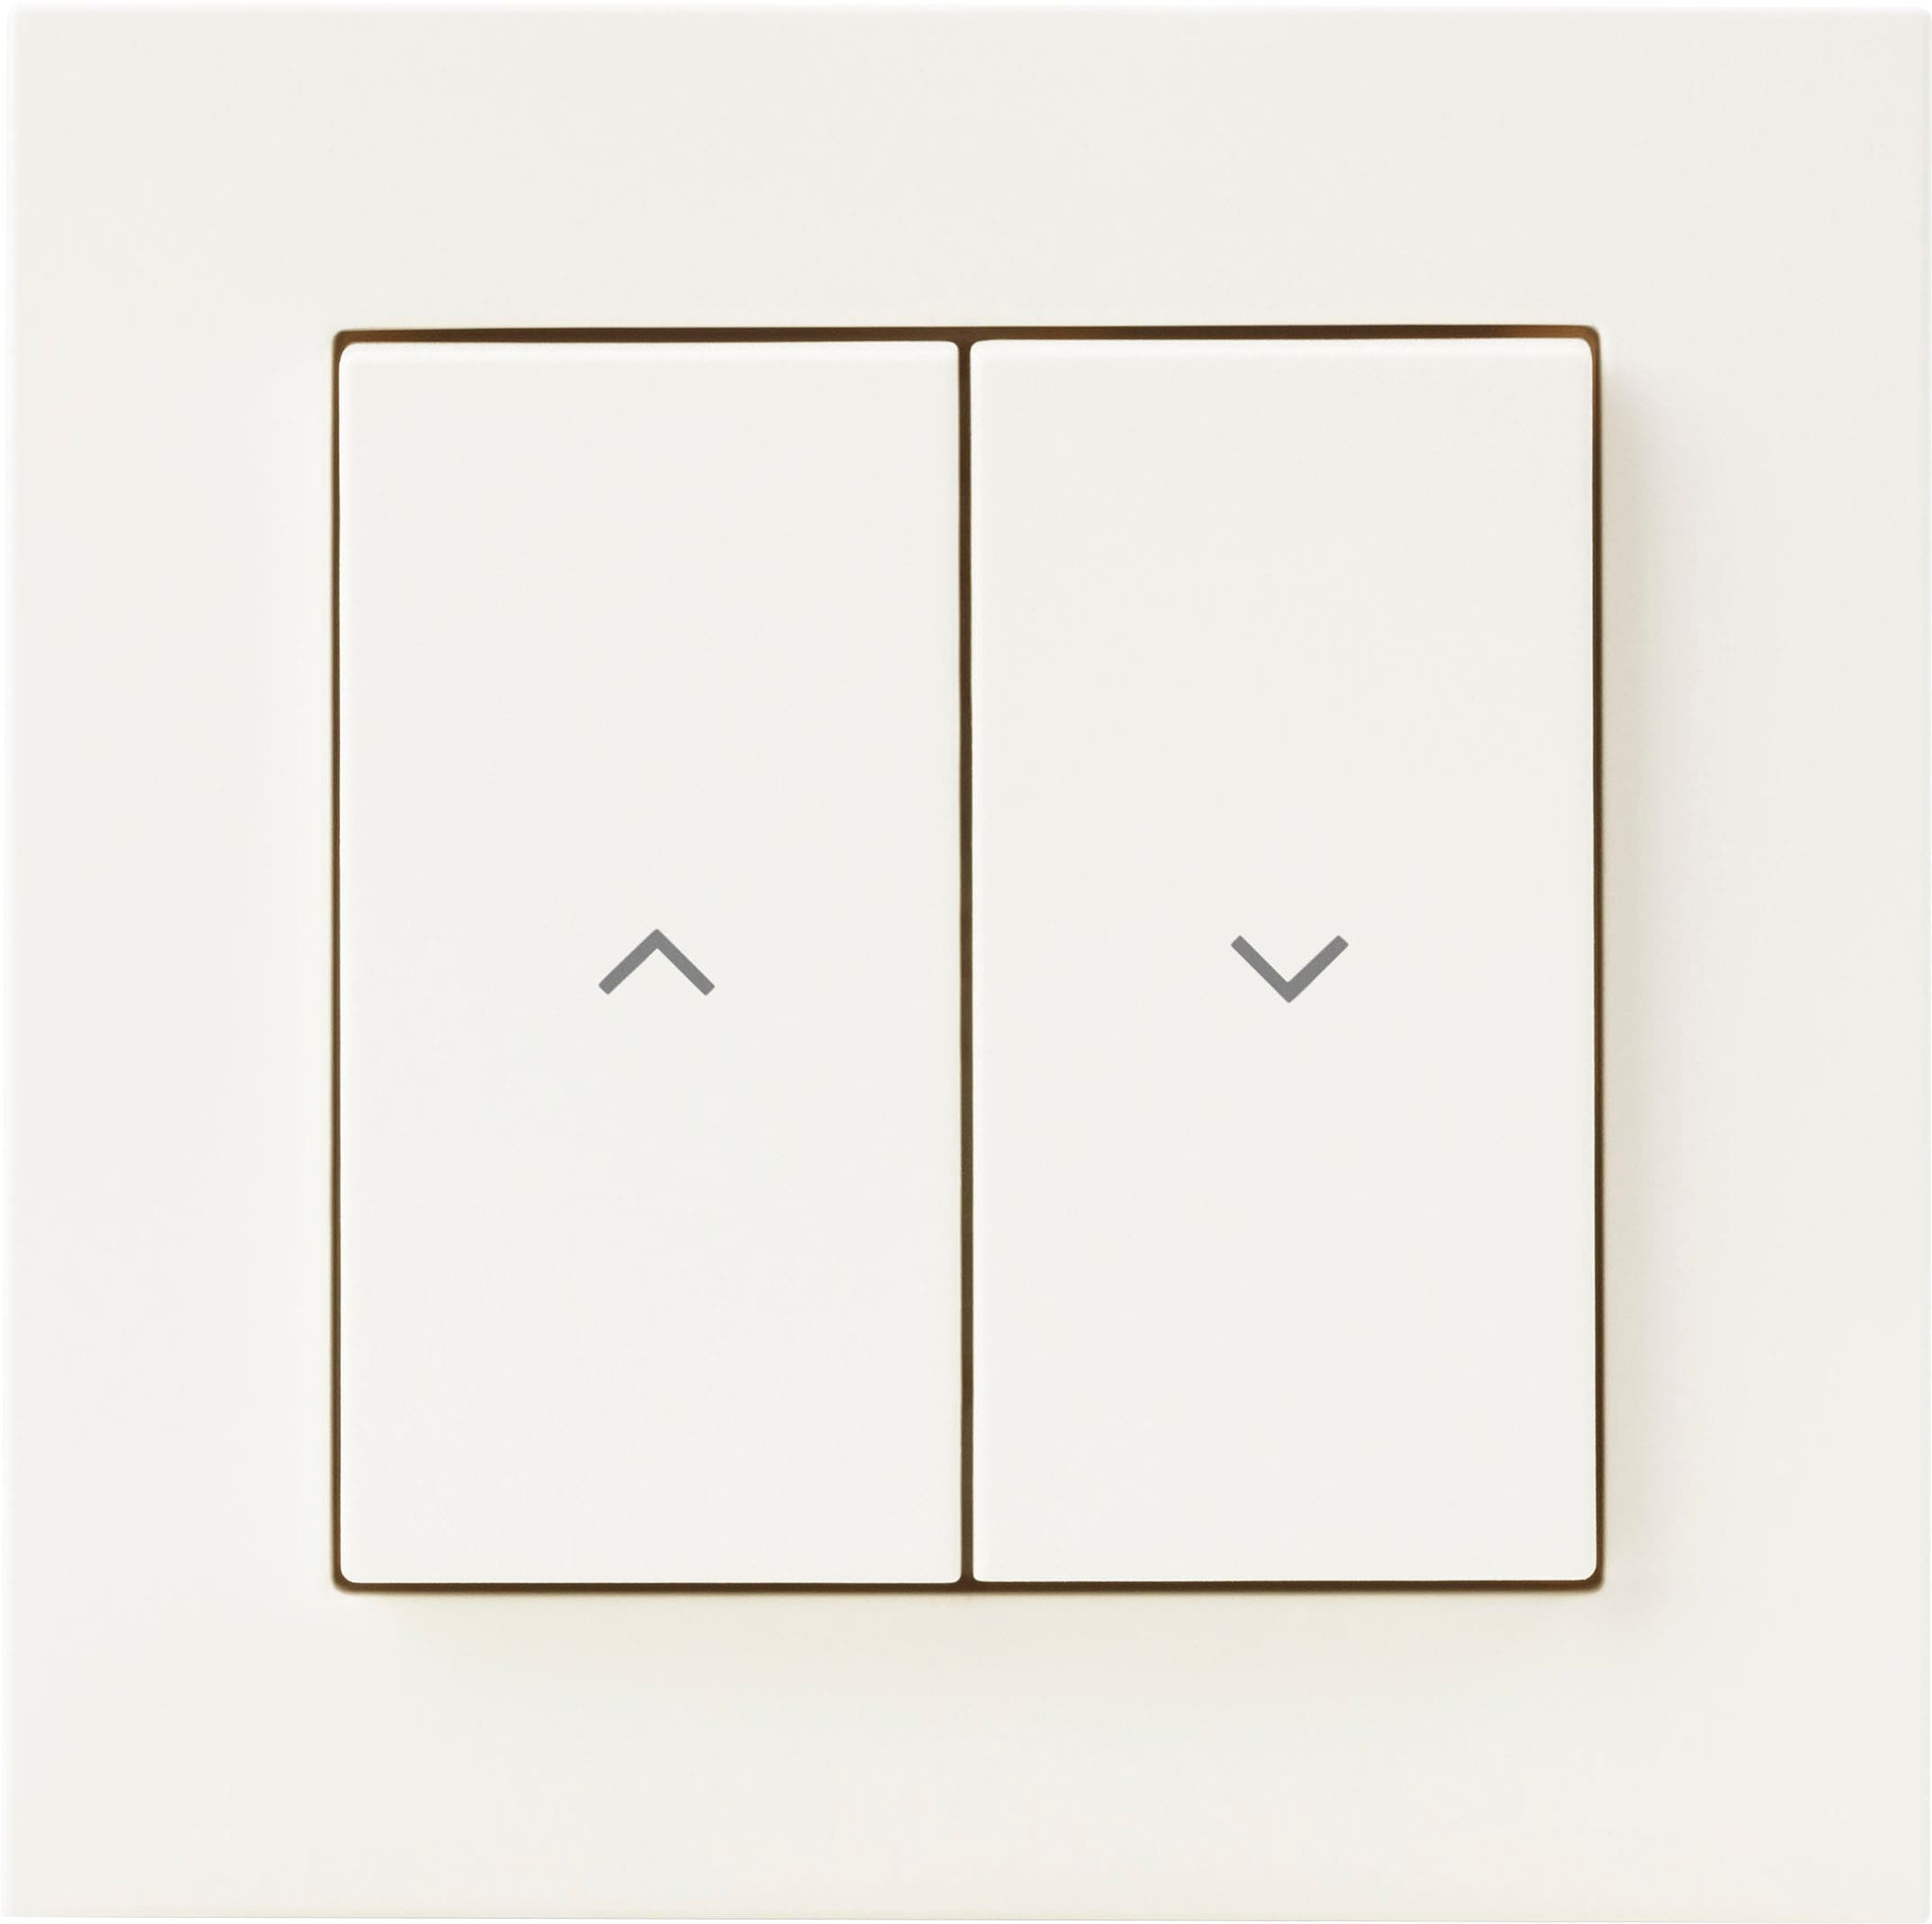 EVE Smart-Home-Station »Shutter Switch«